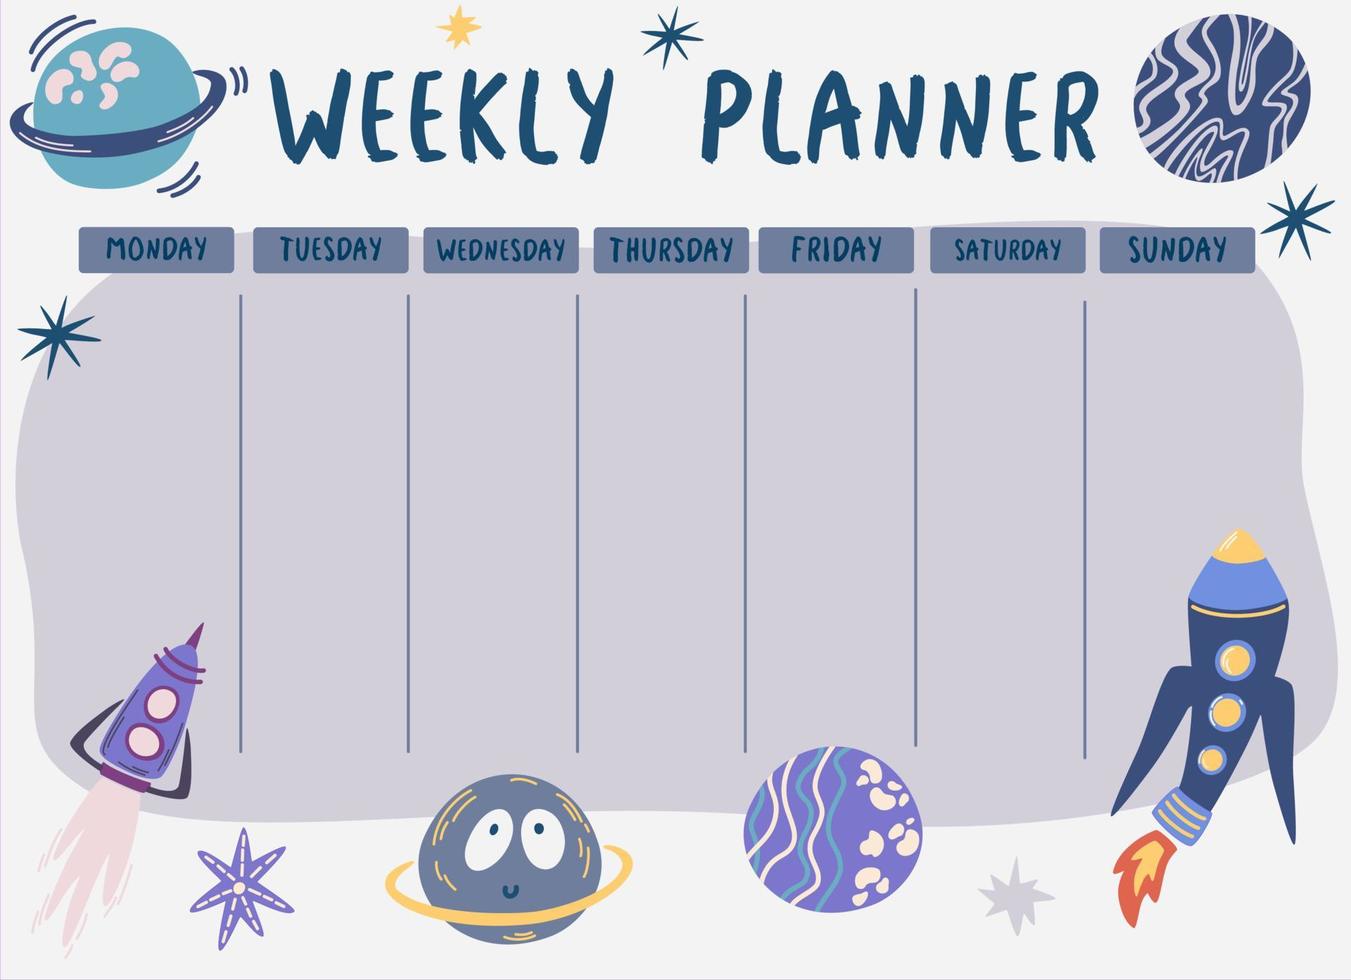 Weekly planner space. Planner with spaceships and planets. Template for sticky notes, planners, check lists, journal and other stationery. Elementary school student. Vector illustration.